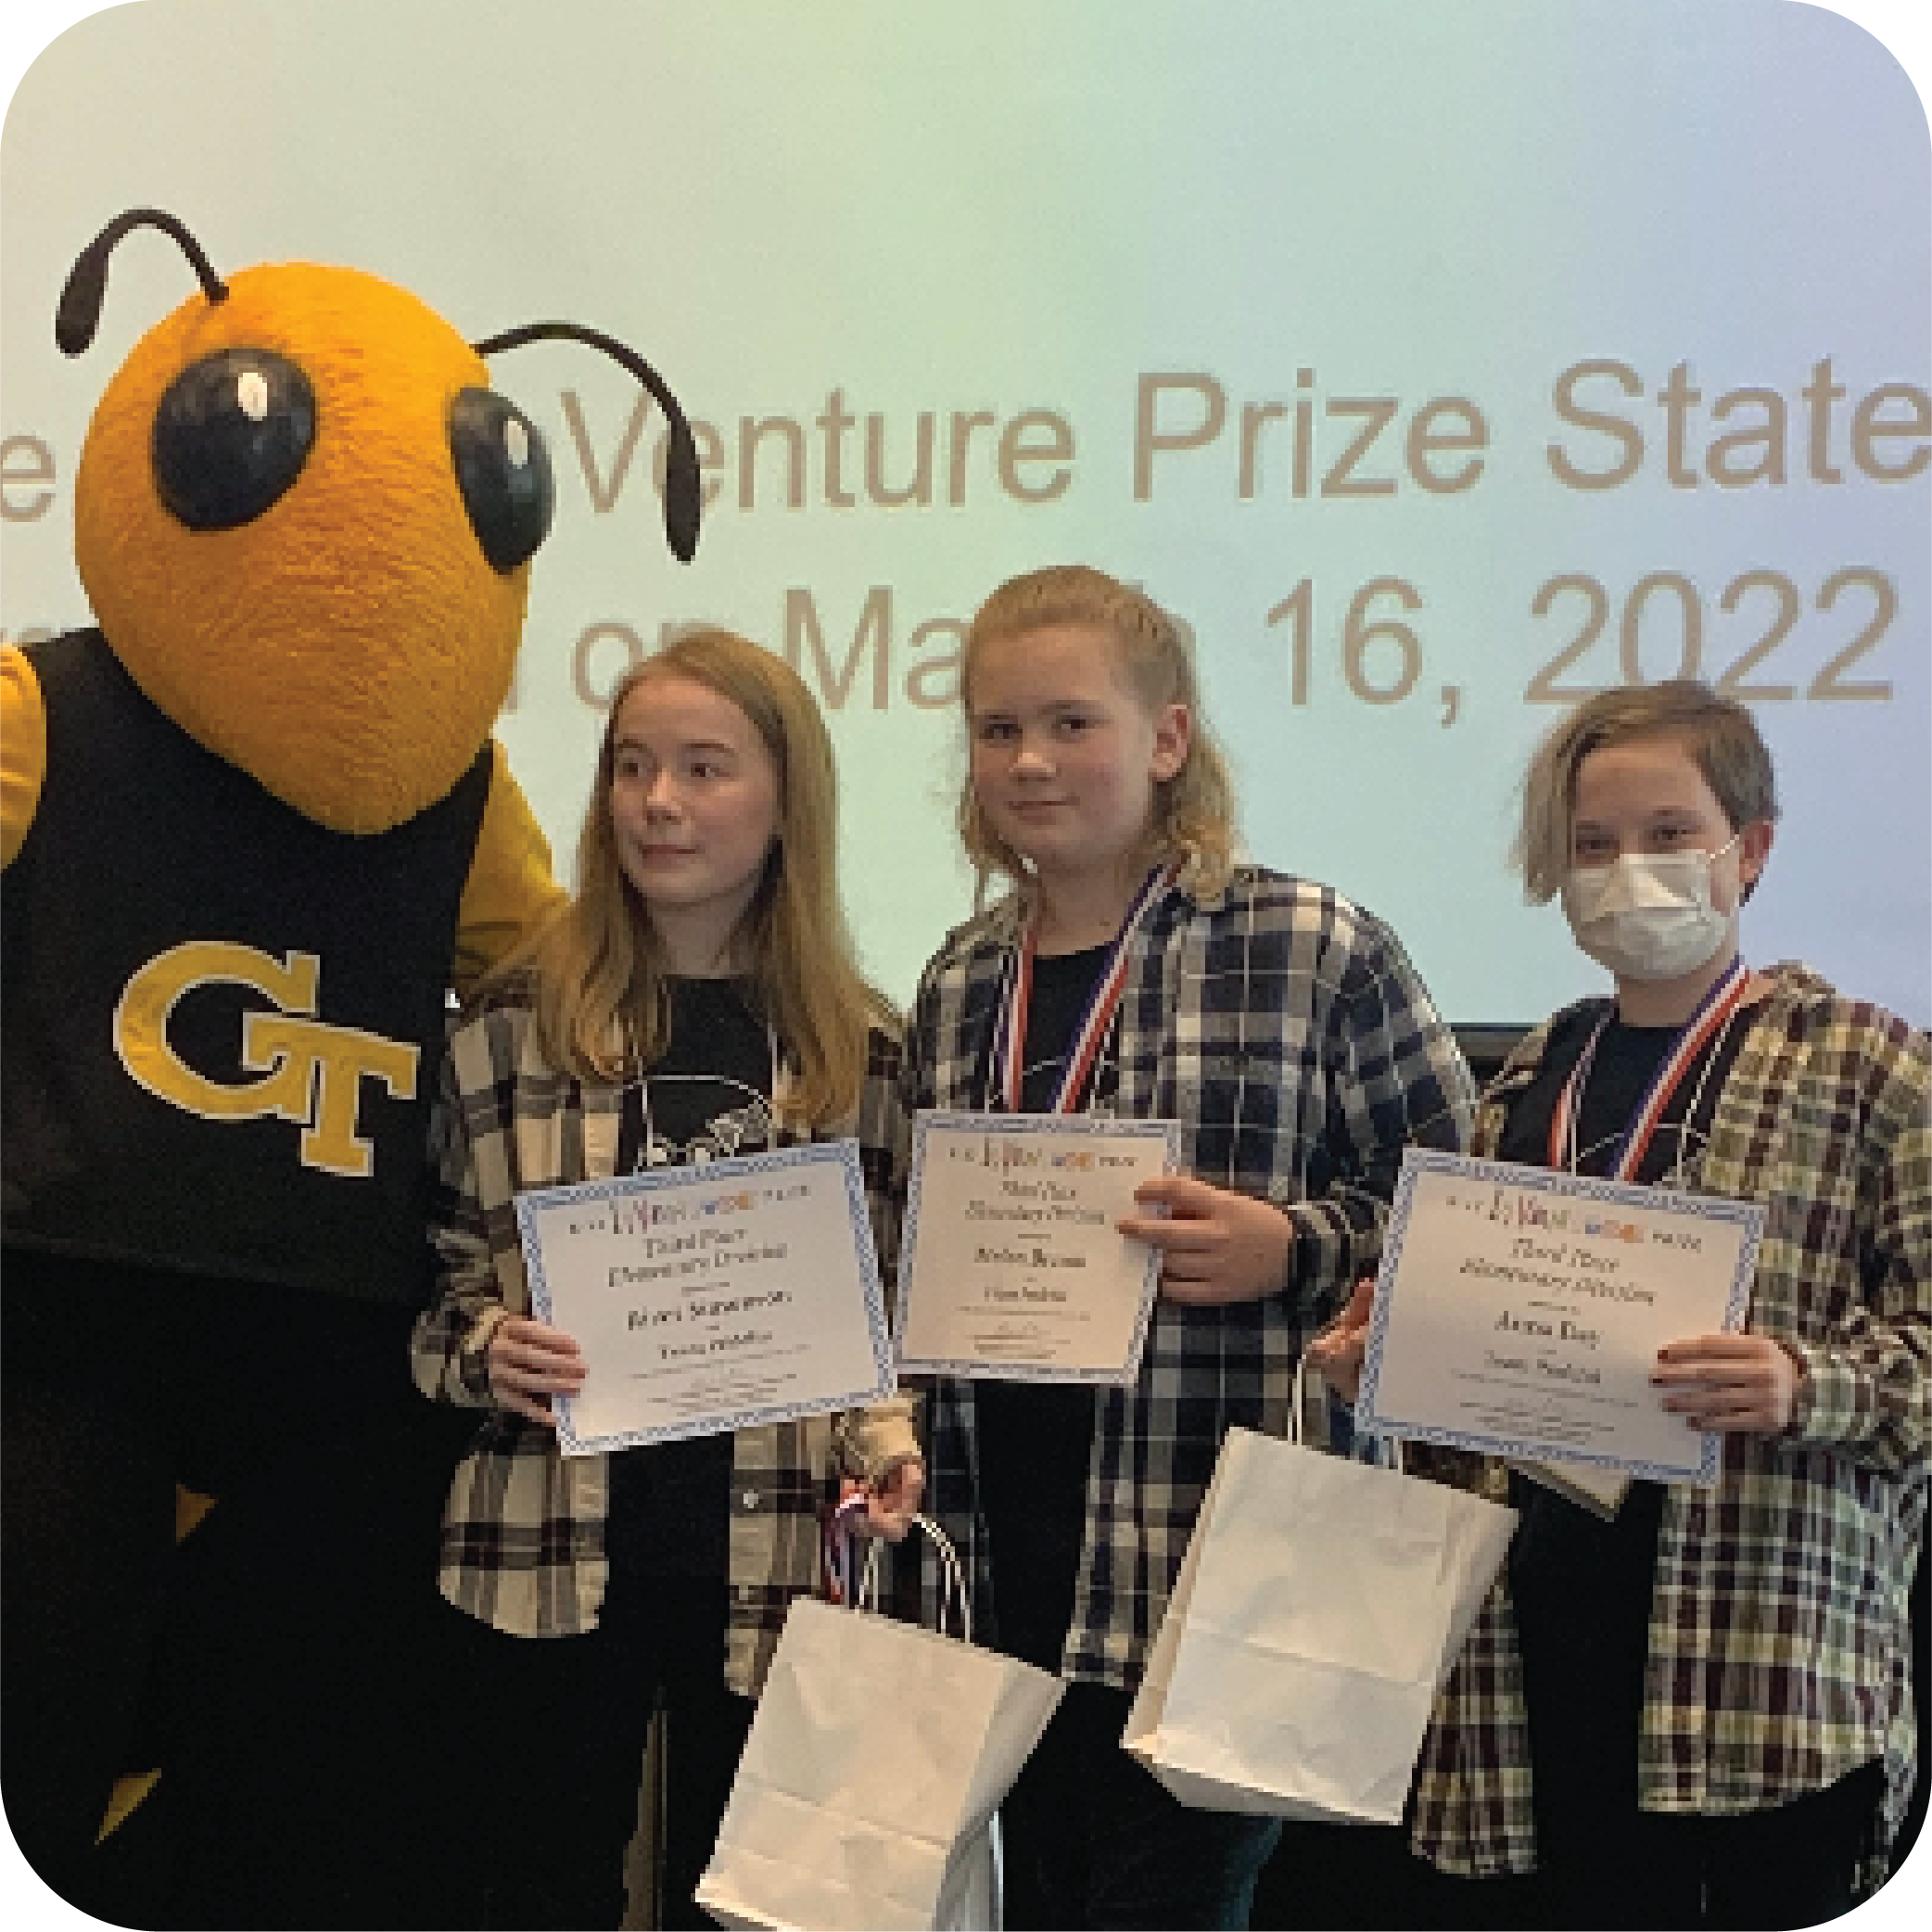 Three smiling students holding certificates and standing next to Buzz (Georgia Tech's yellowjacket mascot).